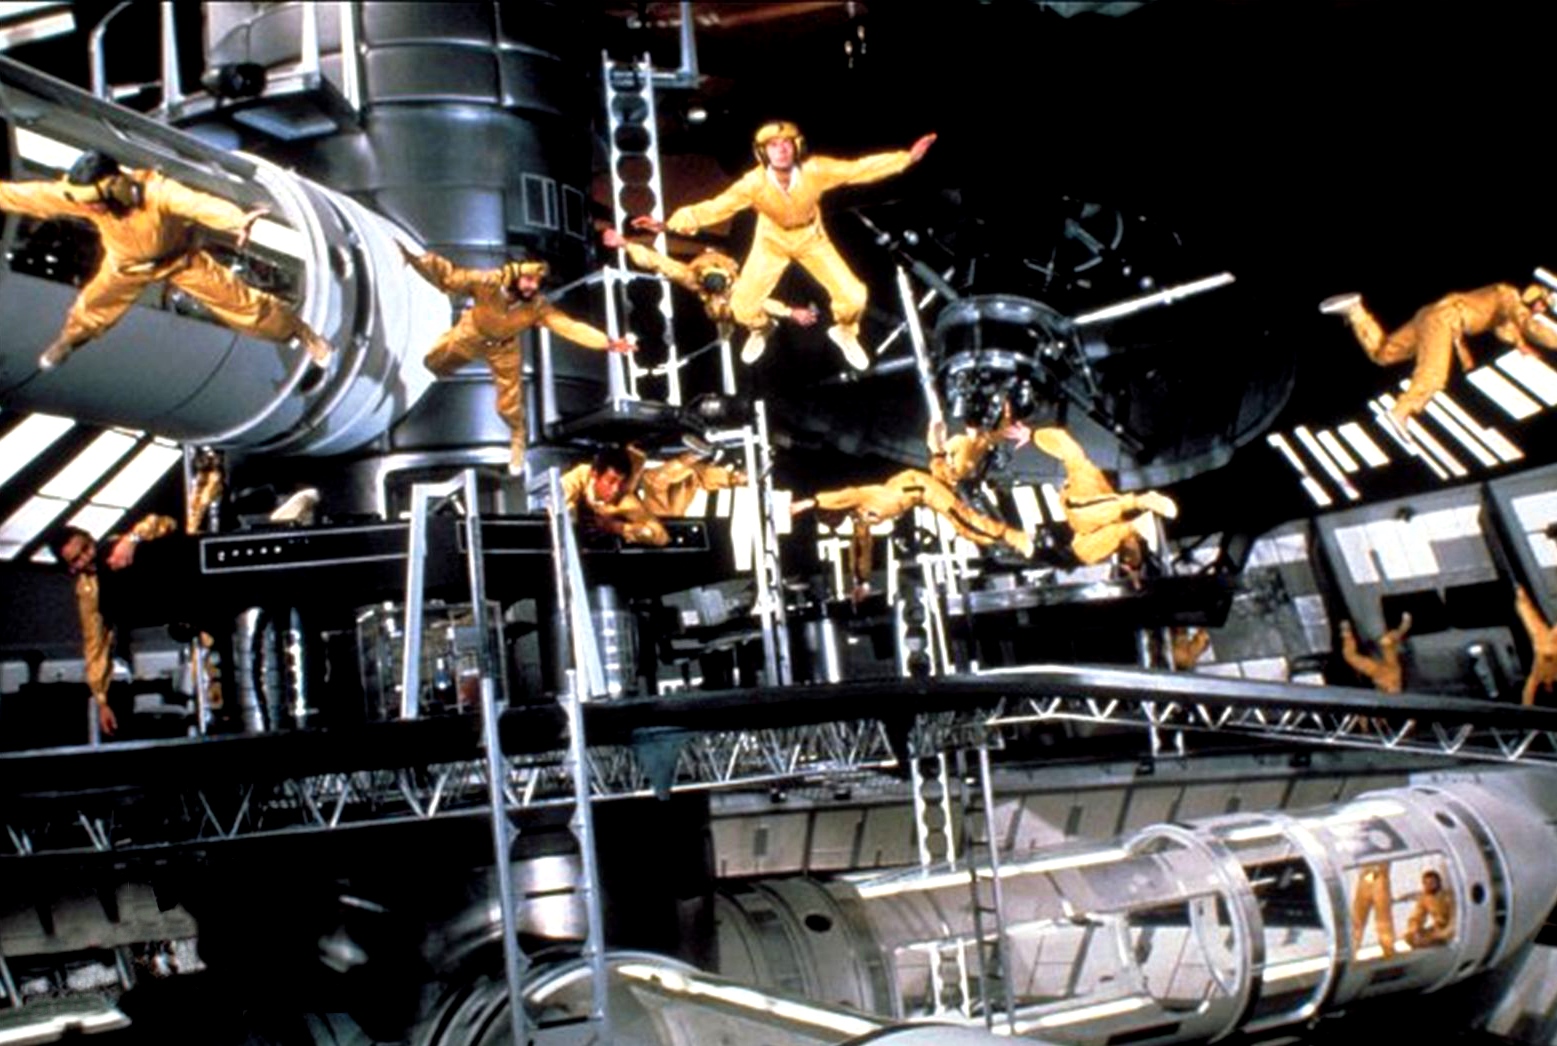 Action aboard the space station in Moonraker (1979)